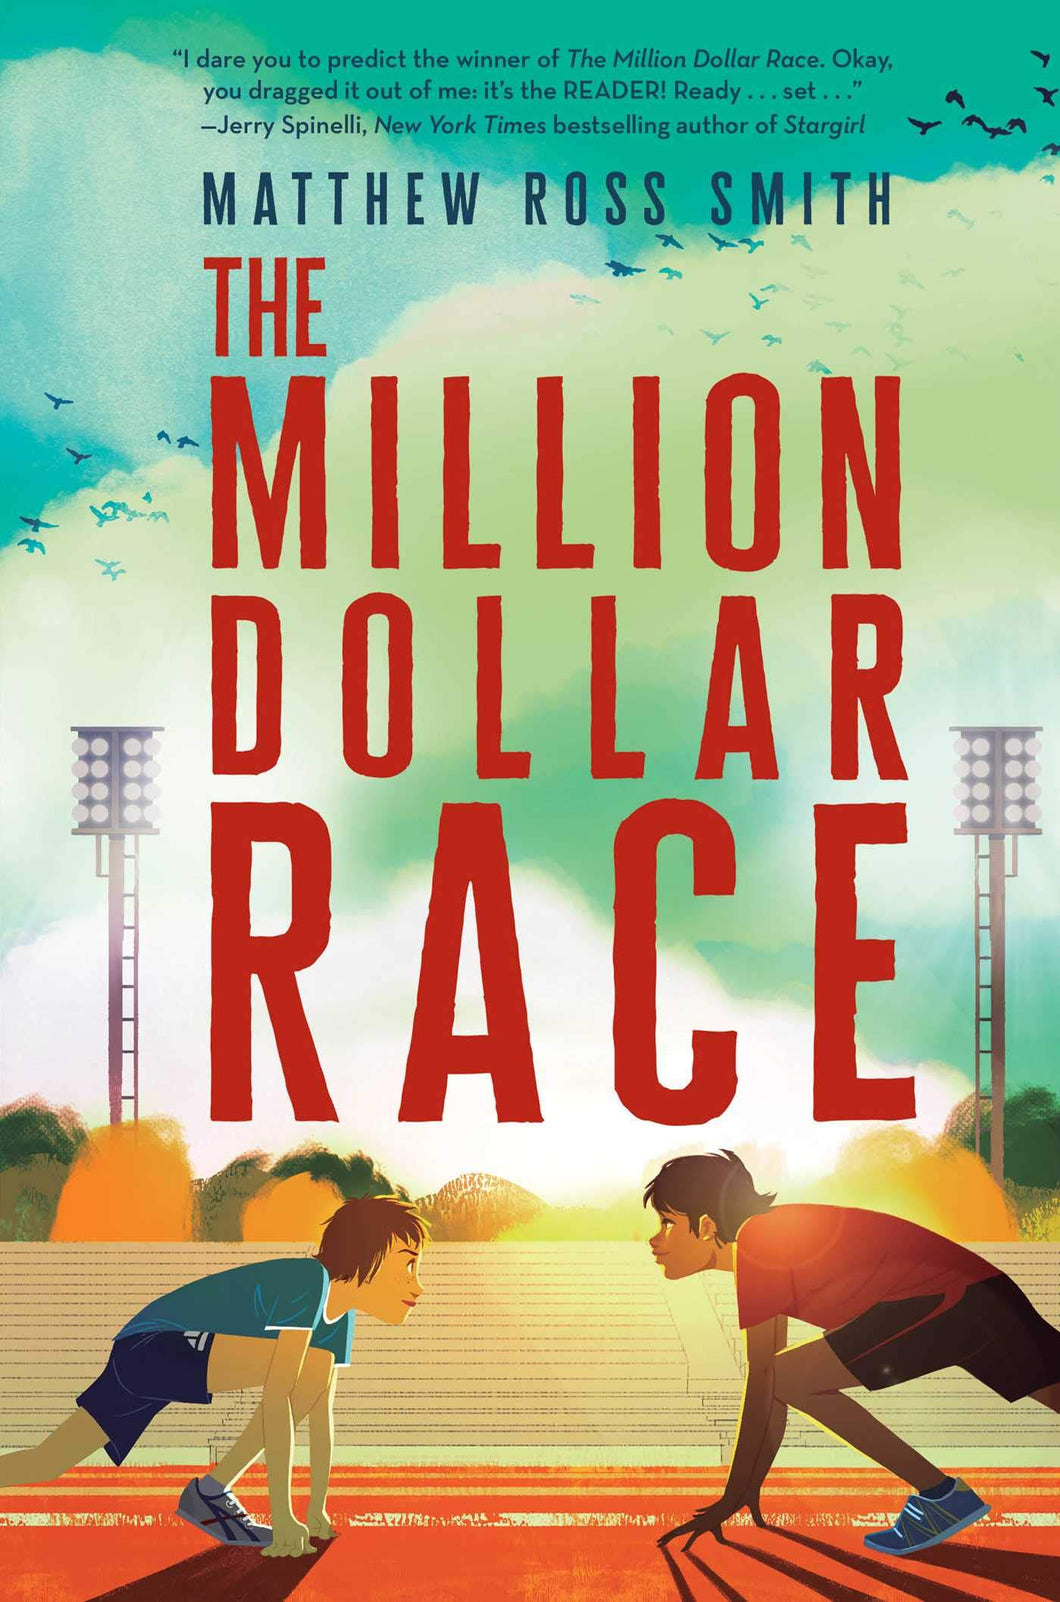 The Million Dollar Race by Matthew Ross Smith / Paperback - NEW BOOK